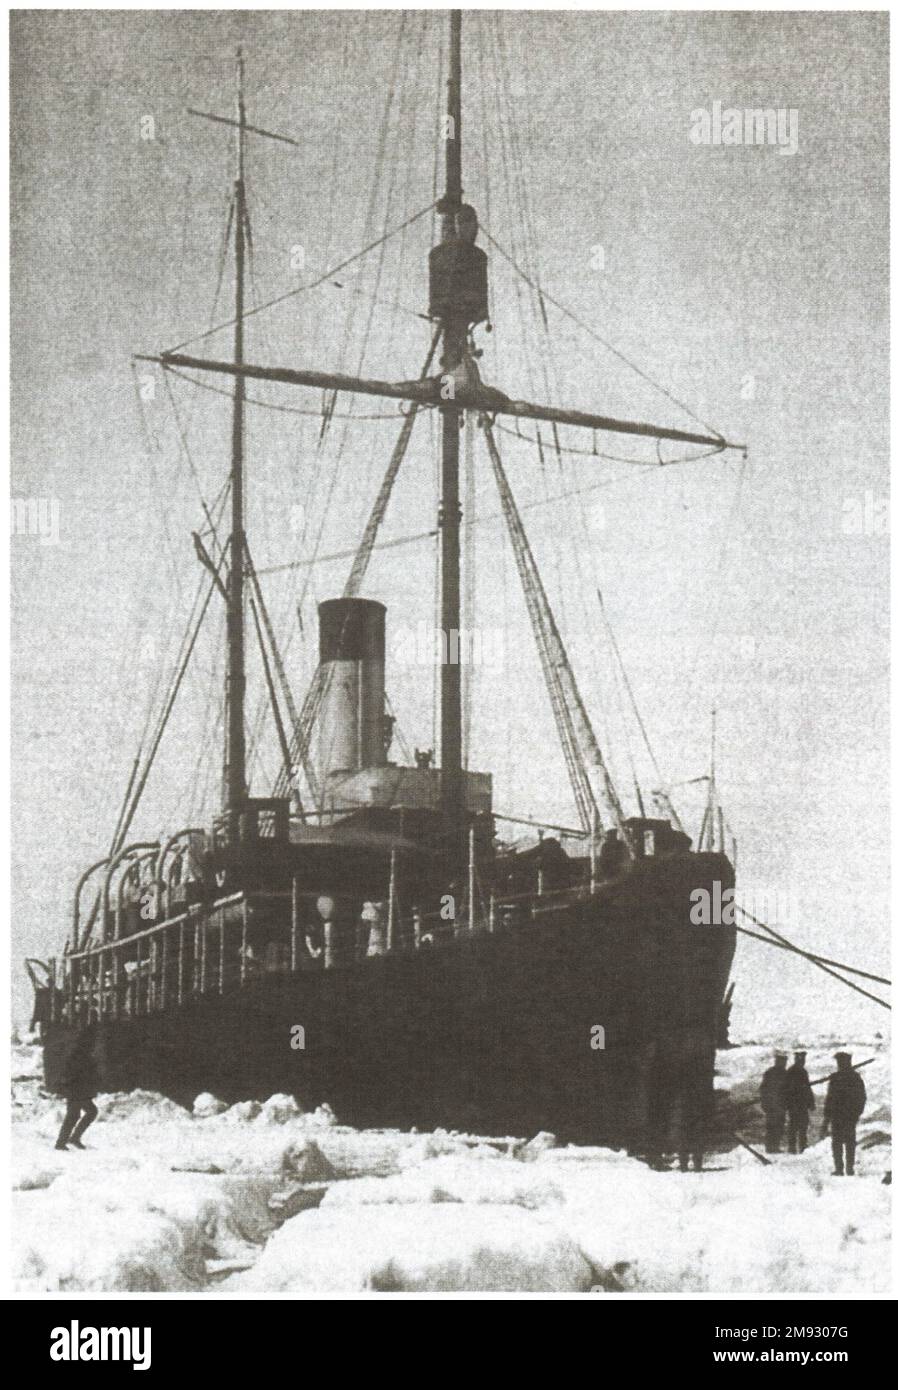 Icebreaker Vaigach, on which A.V. Kolchak sailed through the southern seas to the Arctic in 1909-1910 Stock Photo